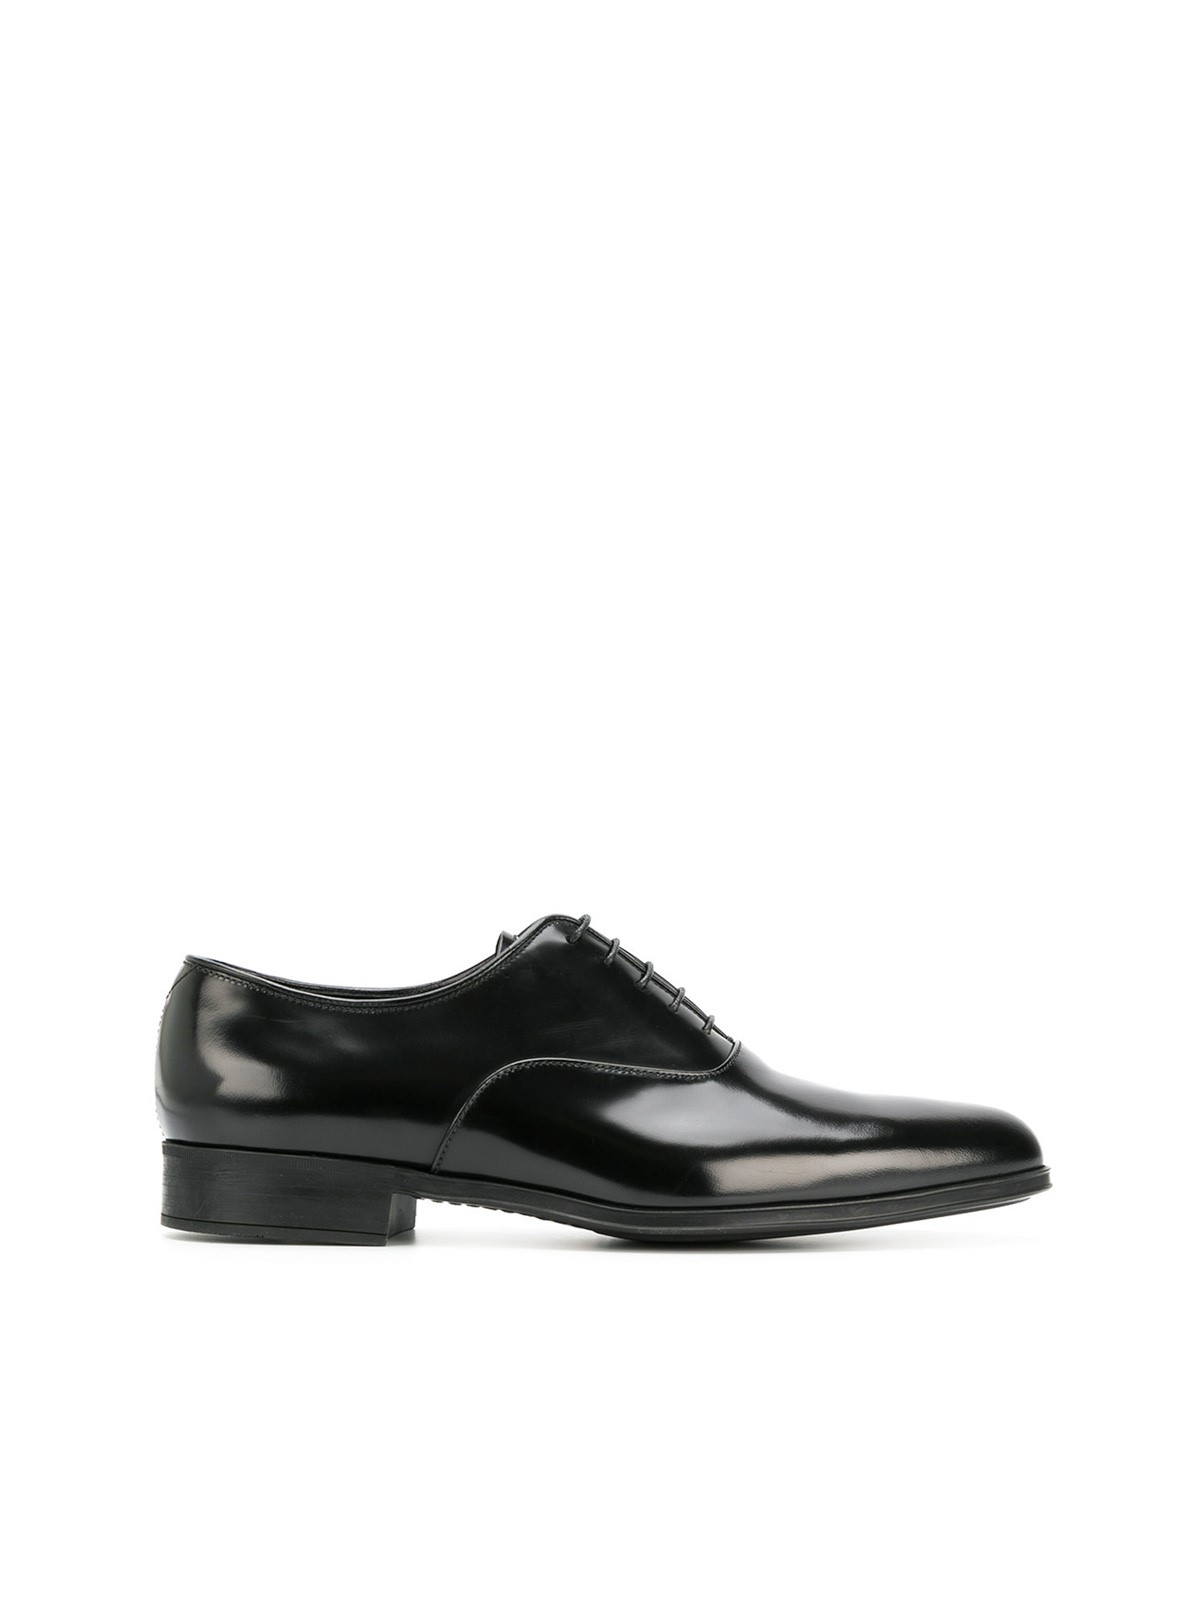 prada OXFORDS LACE-UP SHOES available on montiboutique.com - 21956